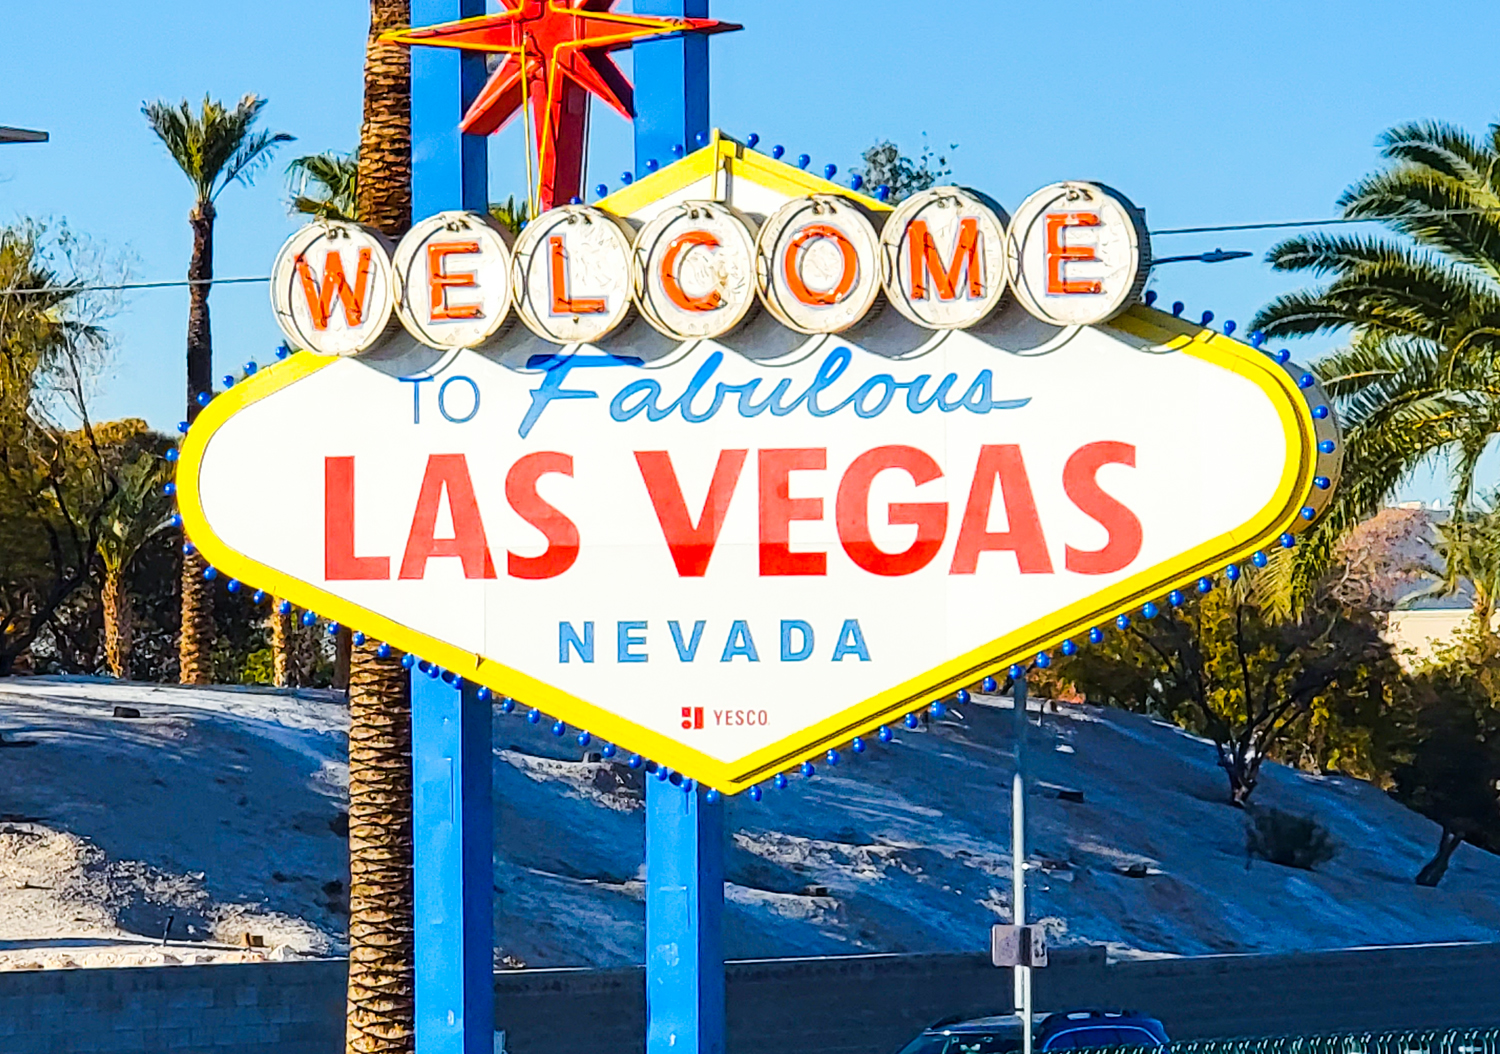 Las Vegas Attractions for Girls Trip